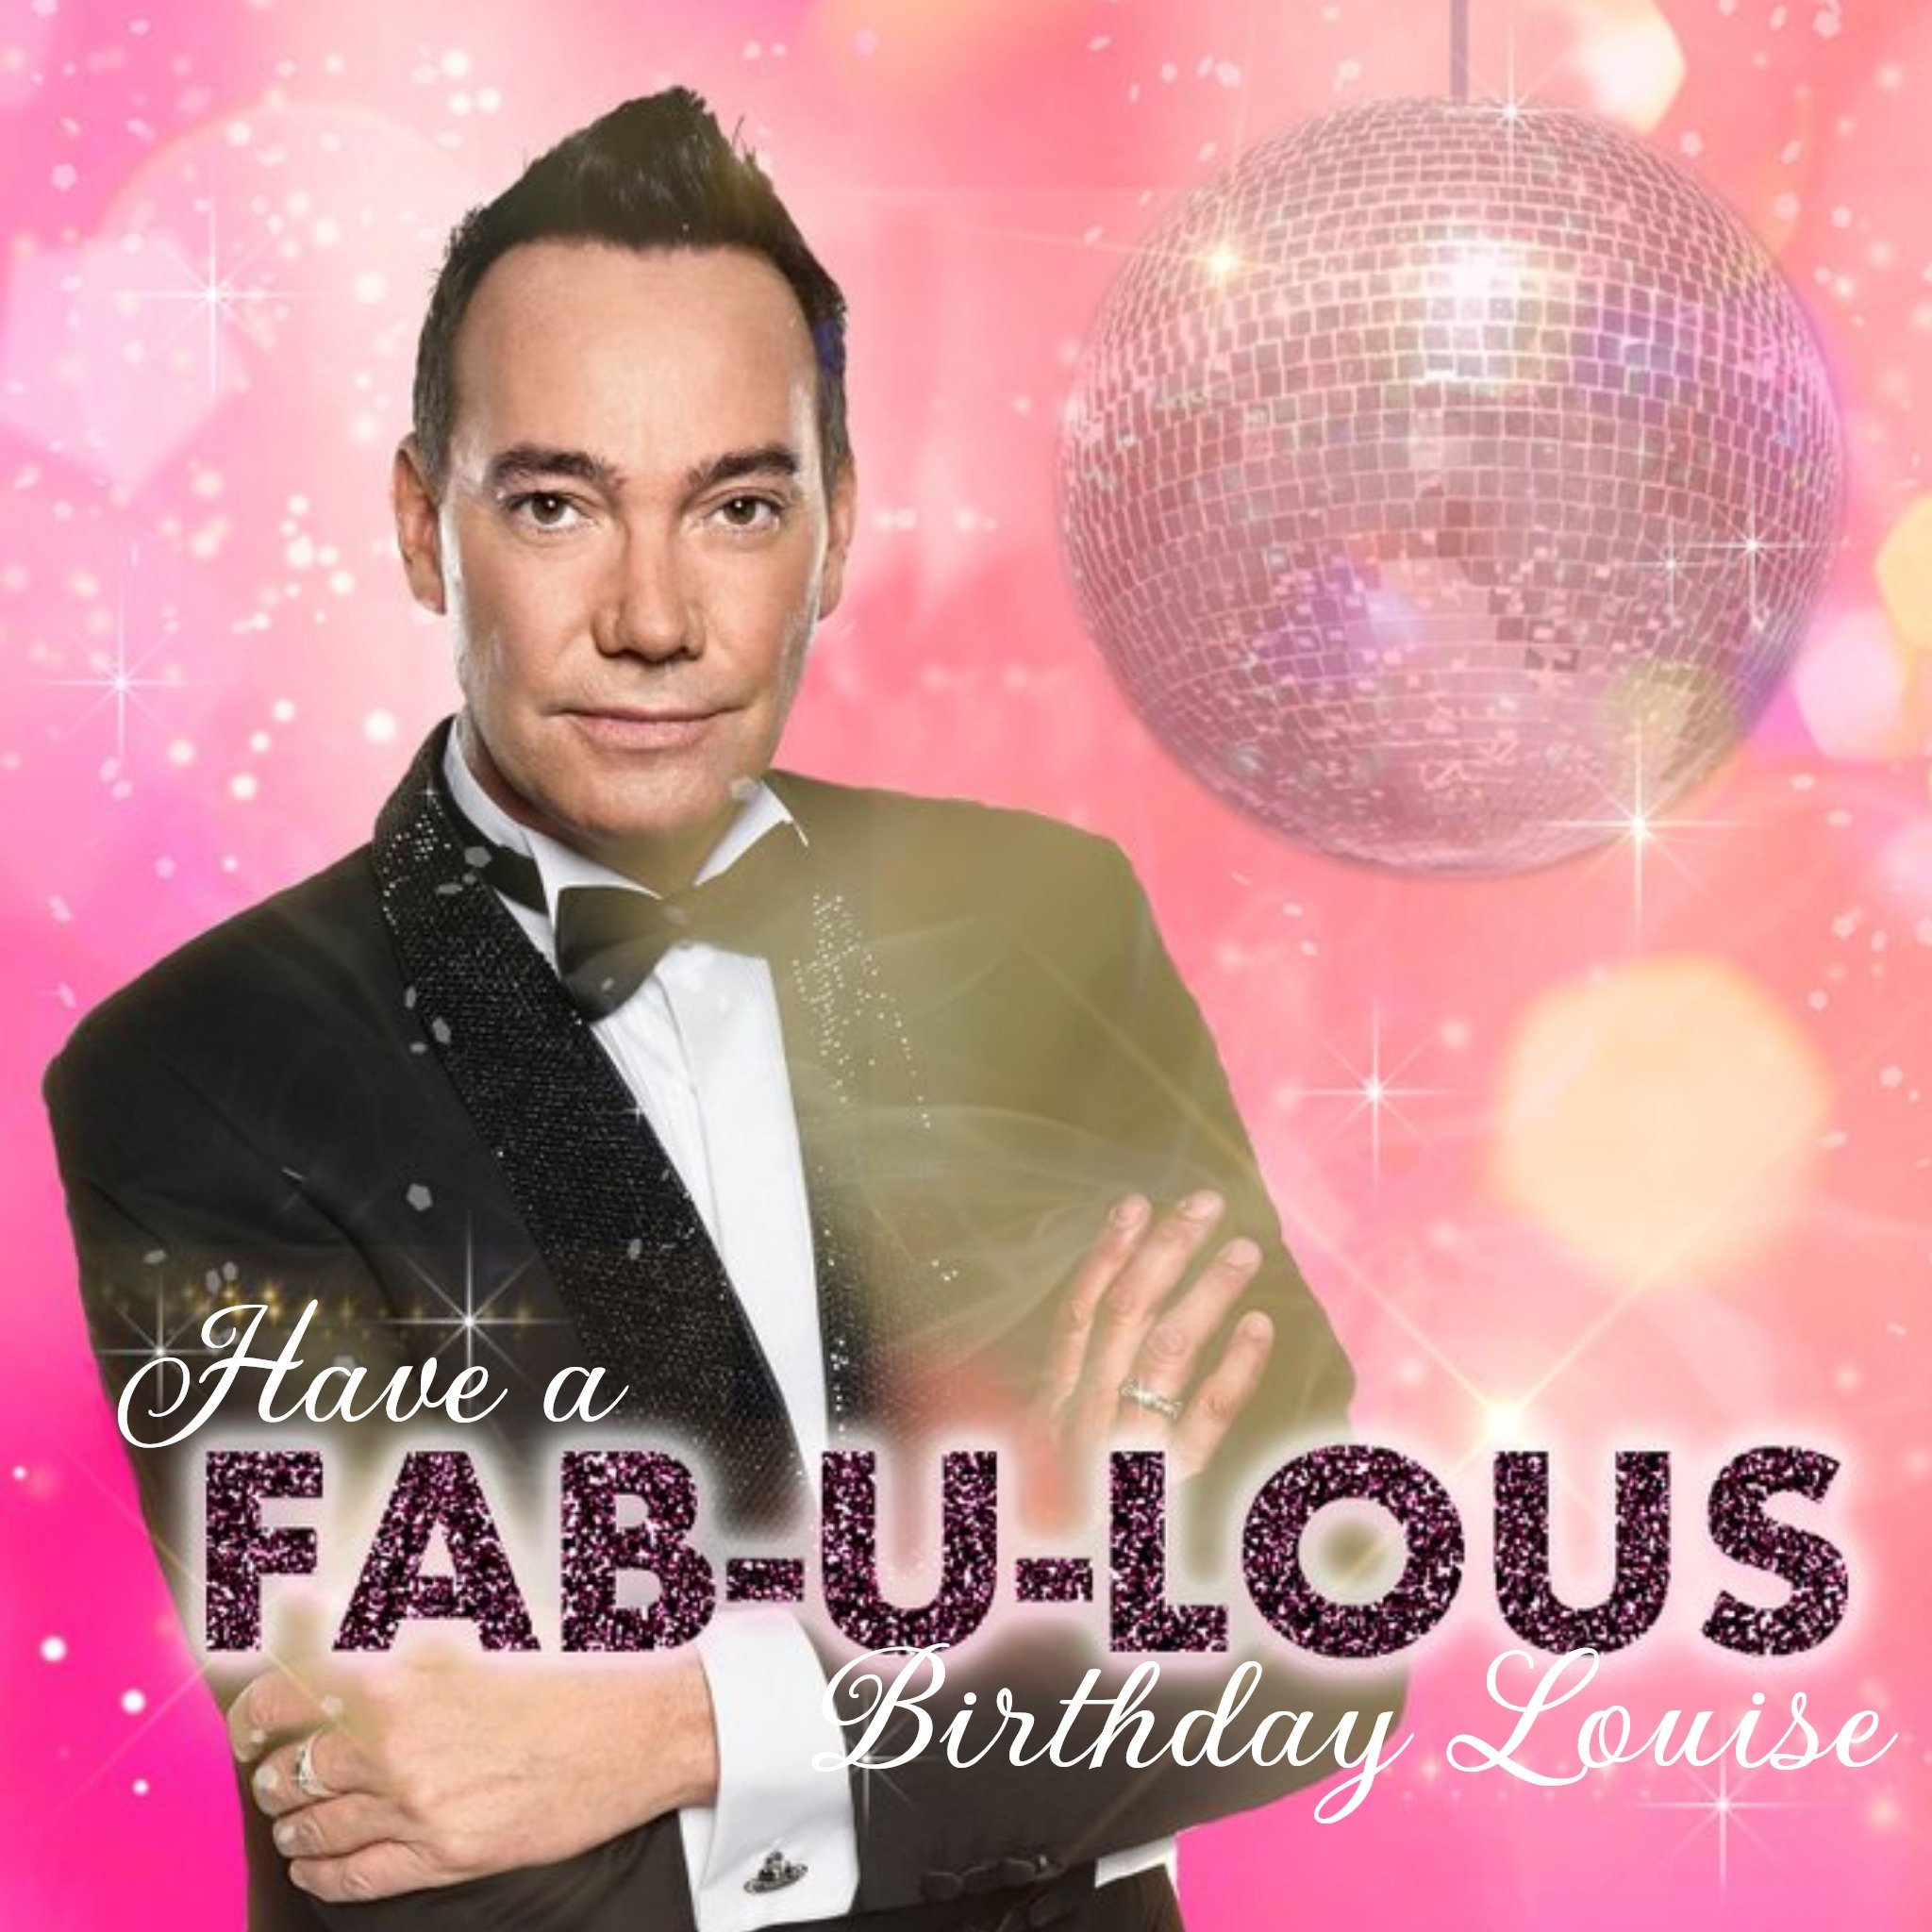 Bbc Strictly Have A Fab-U-Lous Birthday Personalised Greetings Card, Square